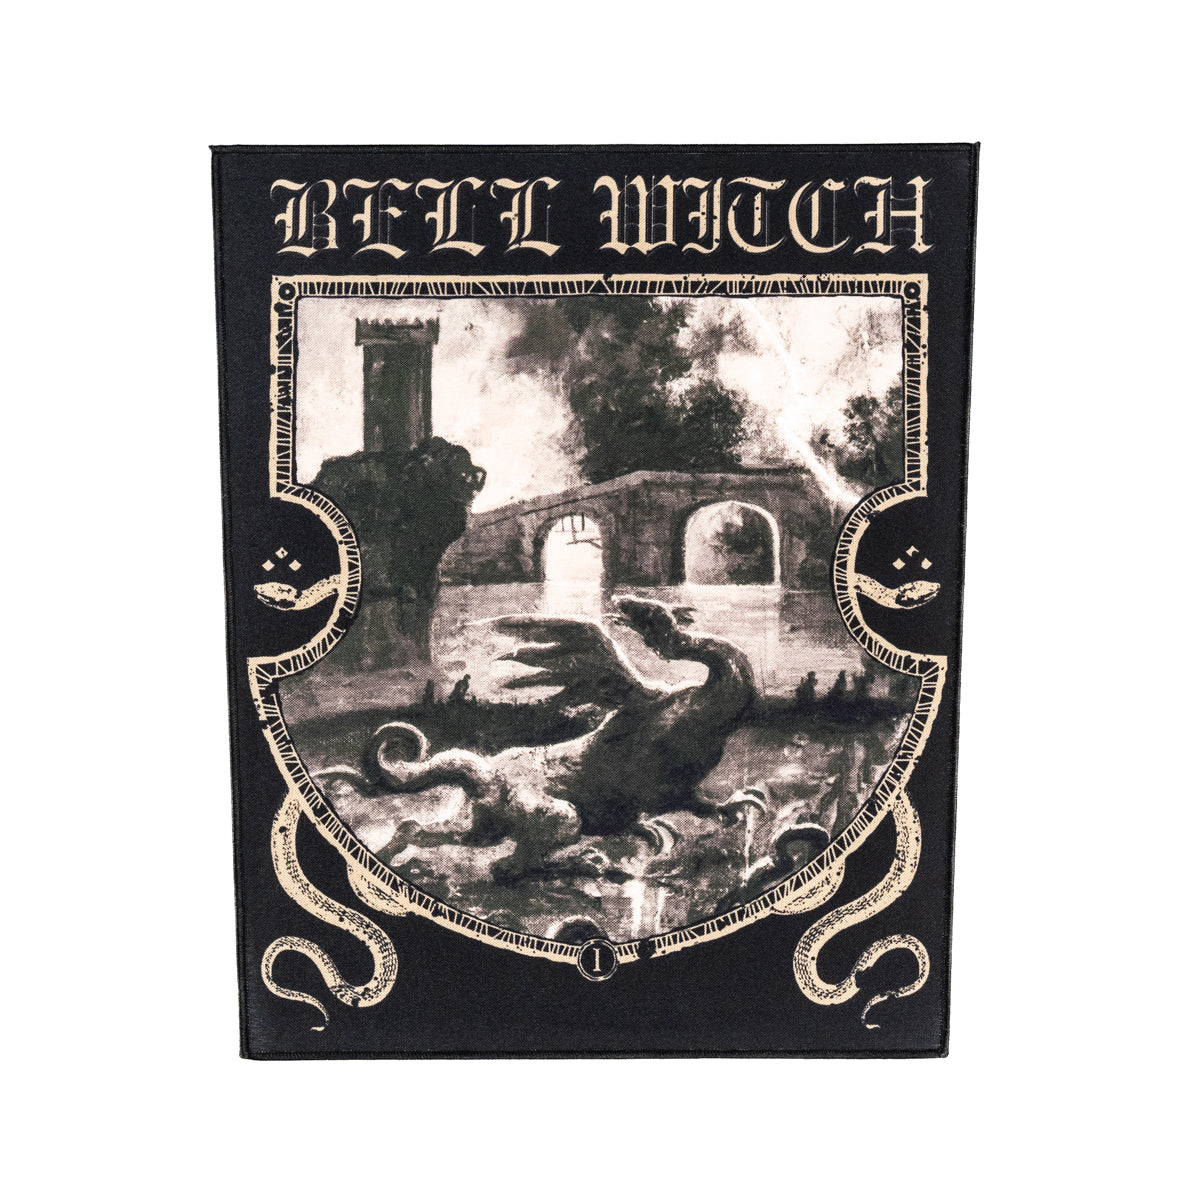 BELL WITCH "Clandestine Gate" Backpatch